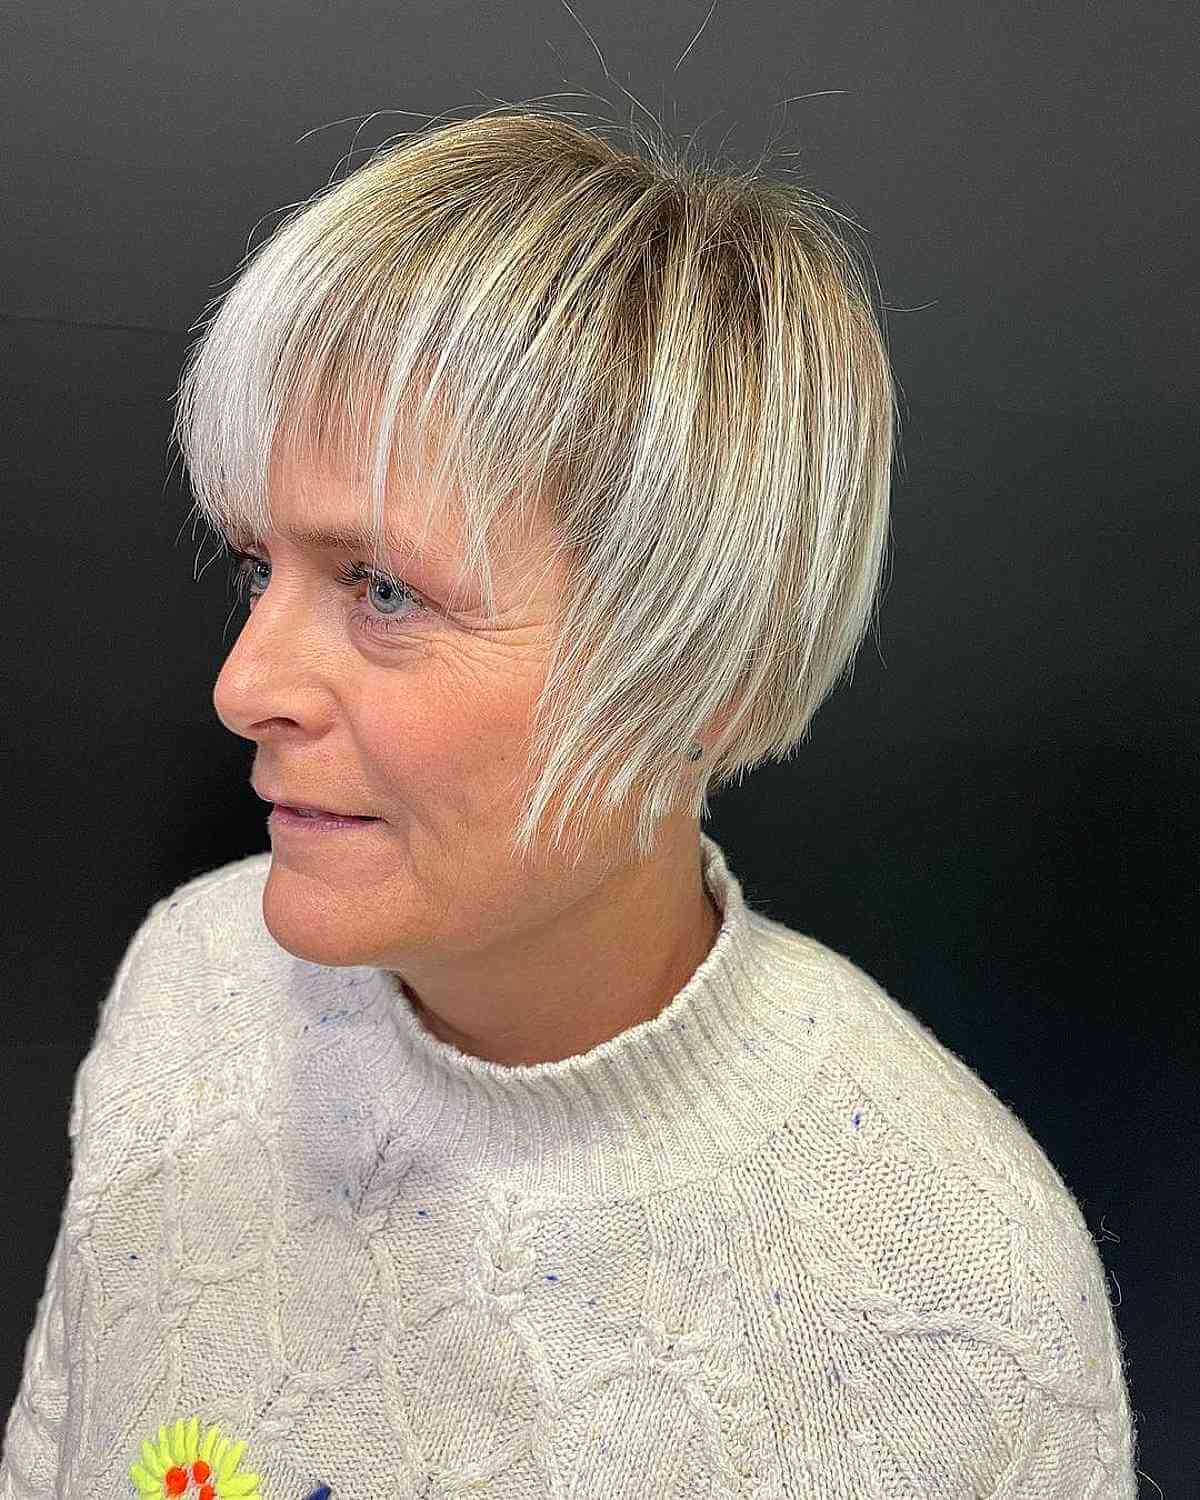 Woman with short blonde hair